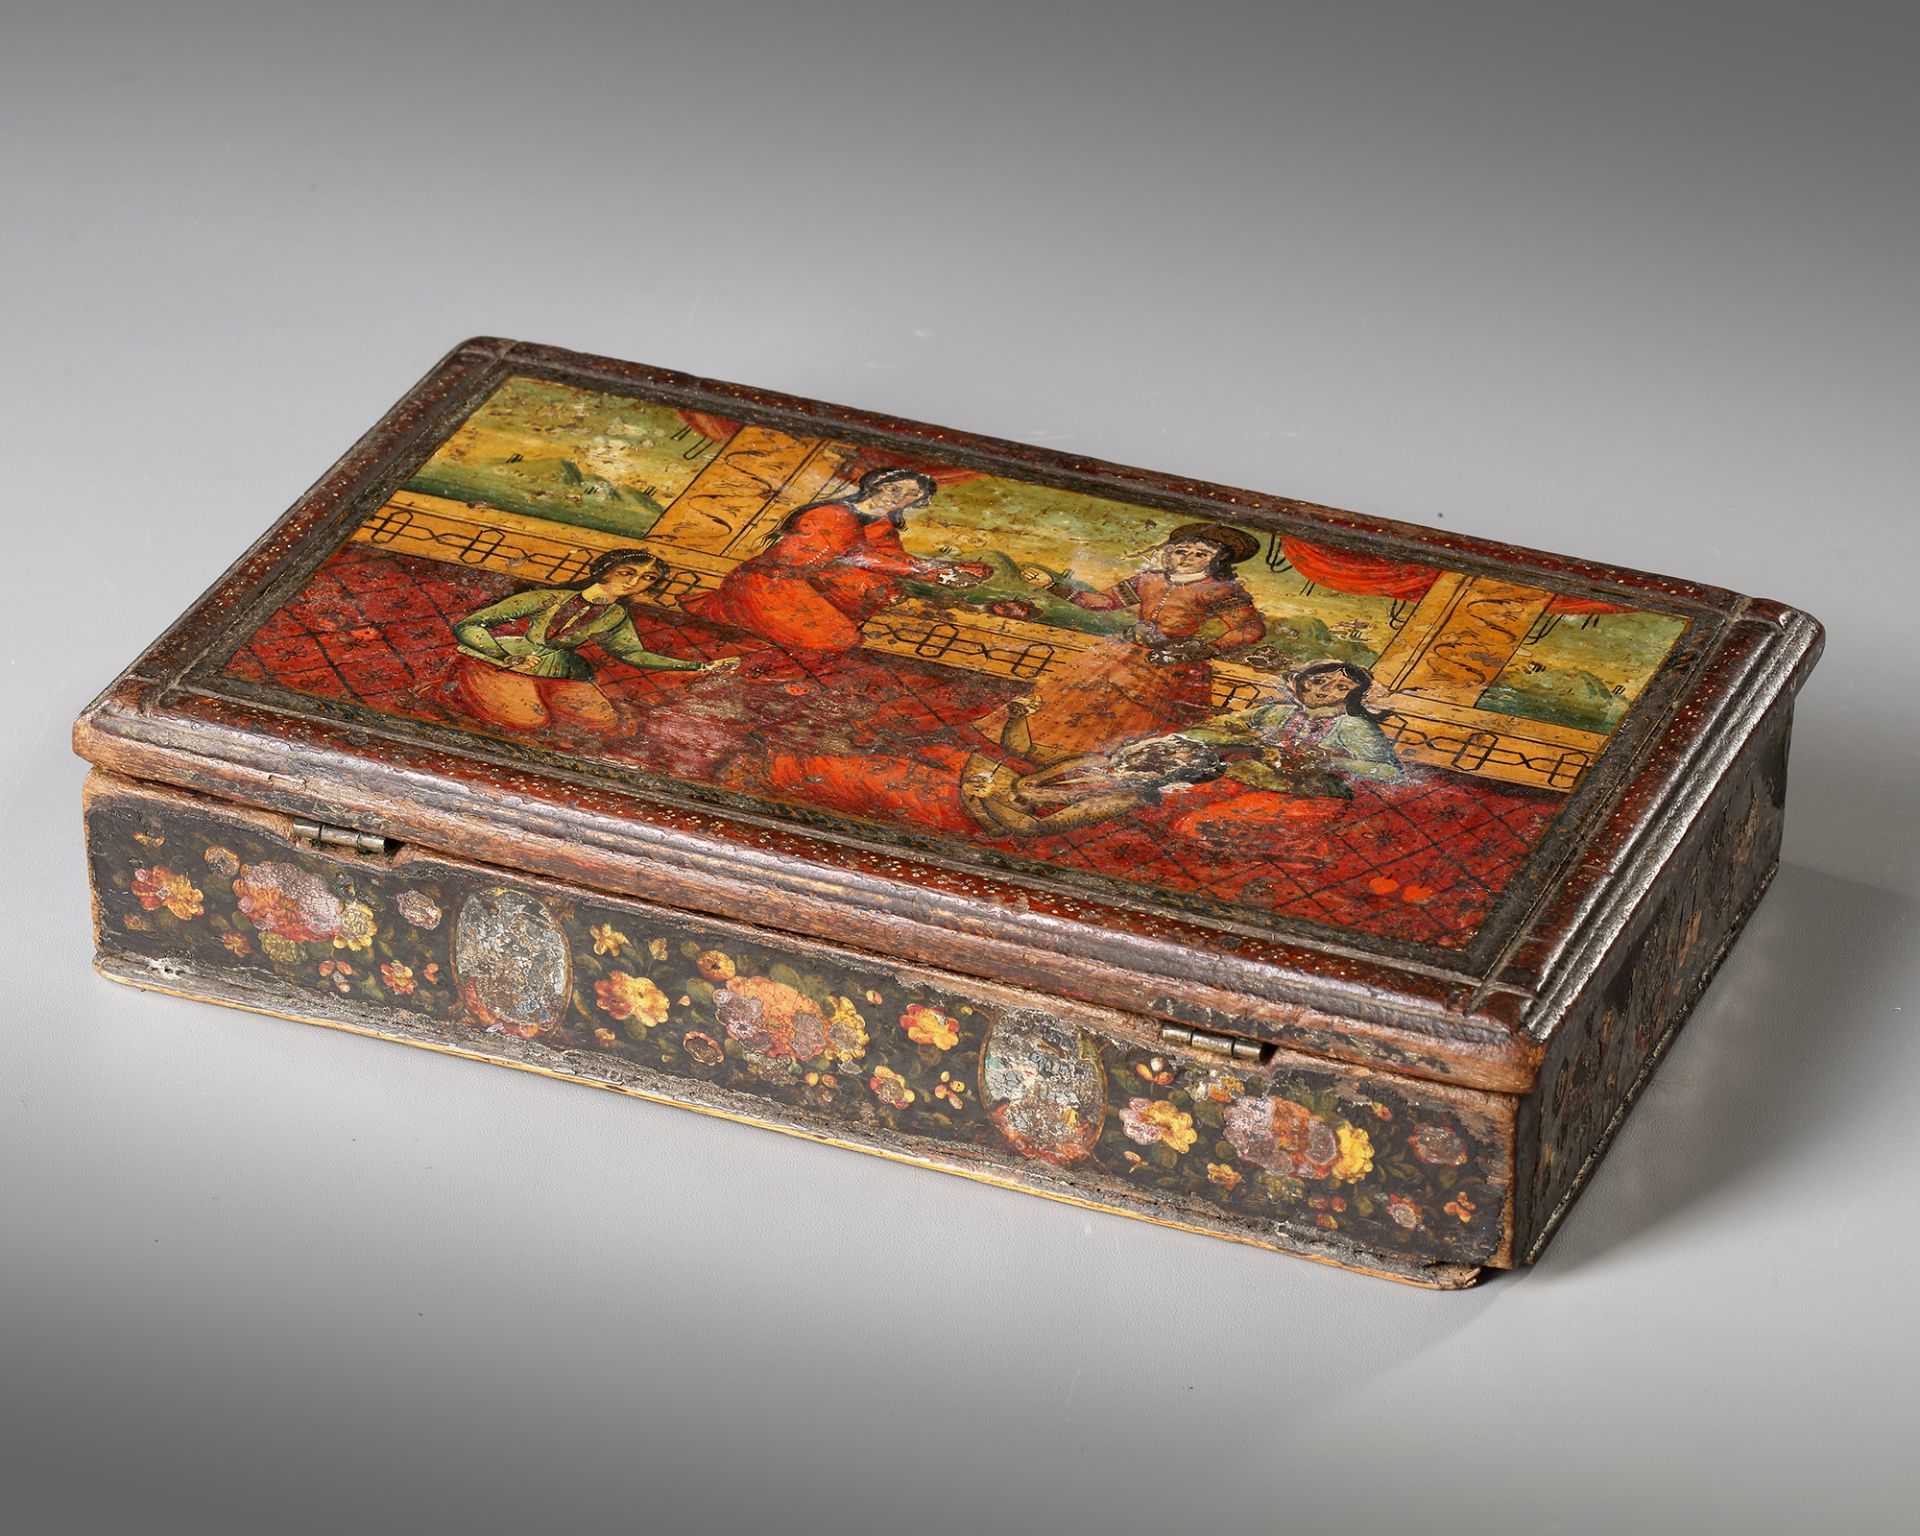 A QAJAR MINIATURE WOODEN WEIGHTS AND SCALES BOX, PERSIA, 19TH CENTURY - Image 2 of 4